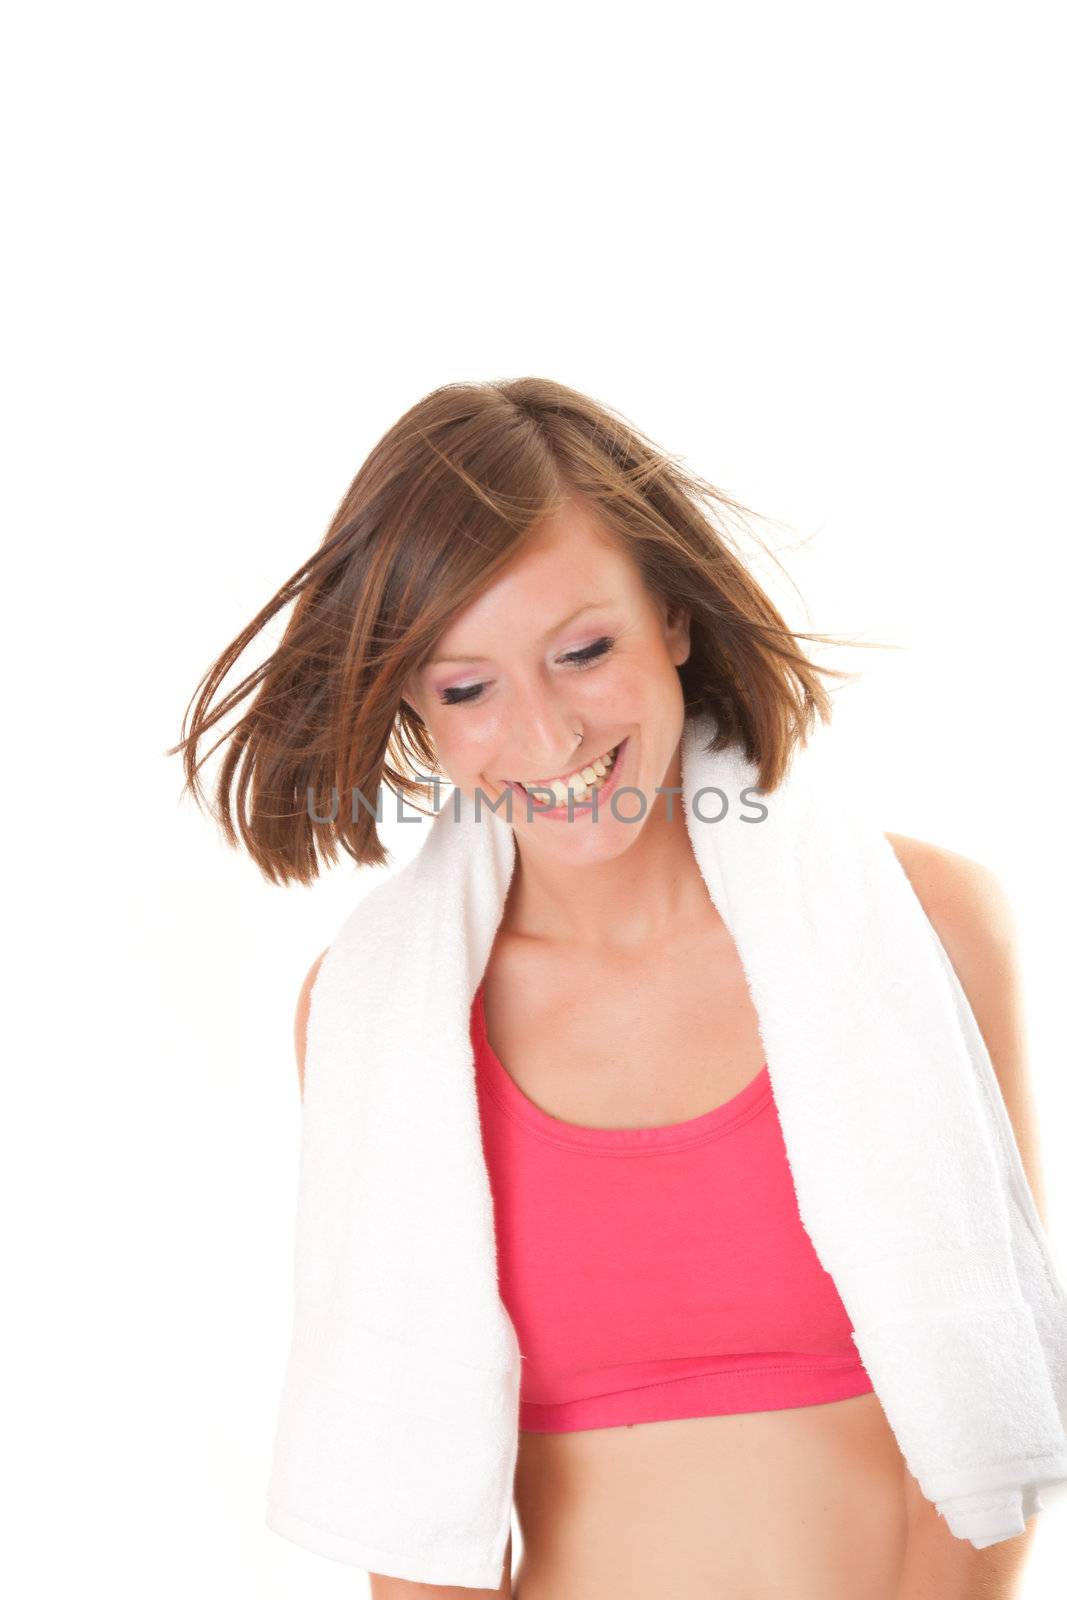 young beautiful sport woman laughing with a towel isolated on wh by Lcrespi